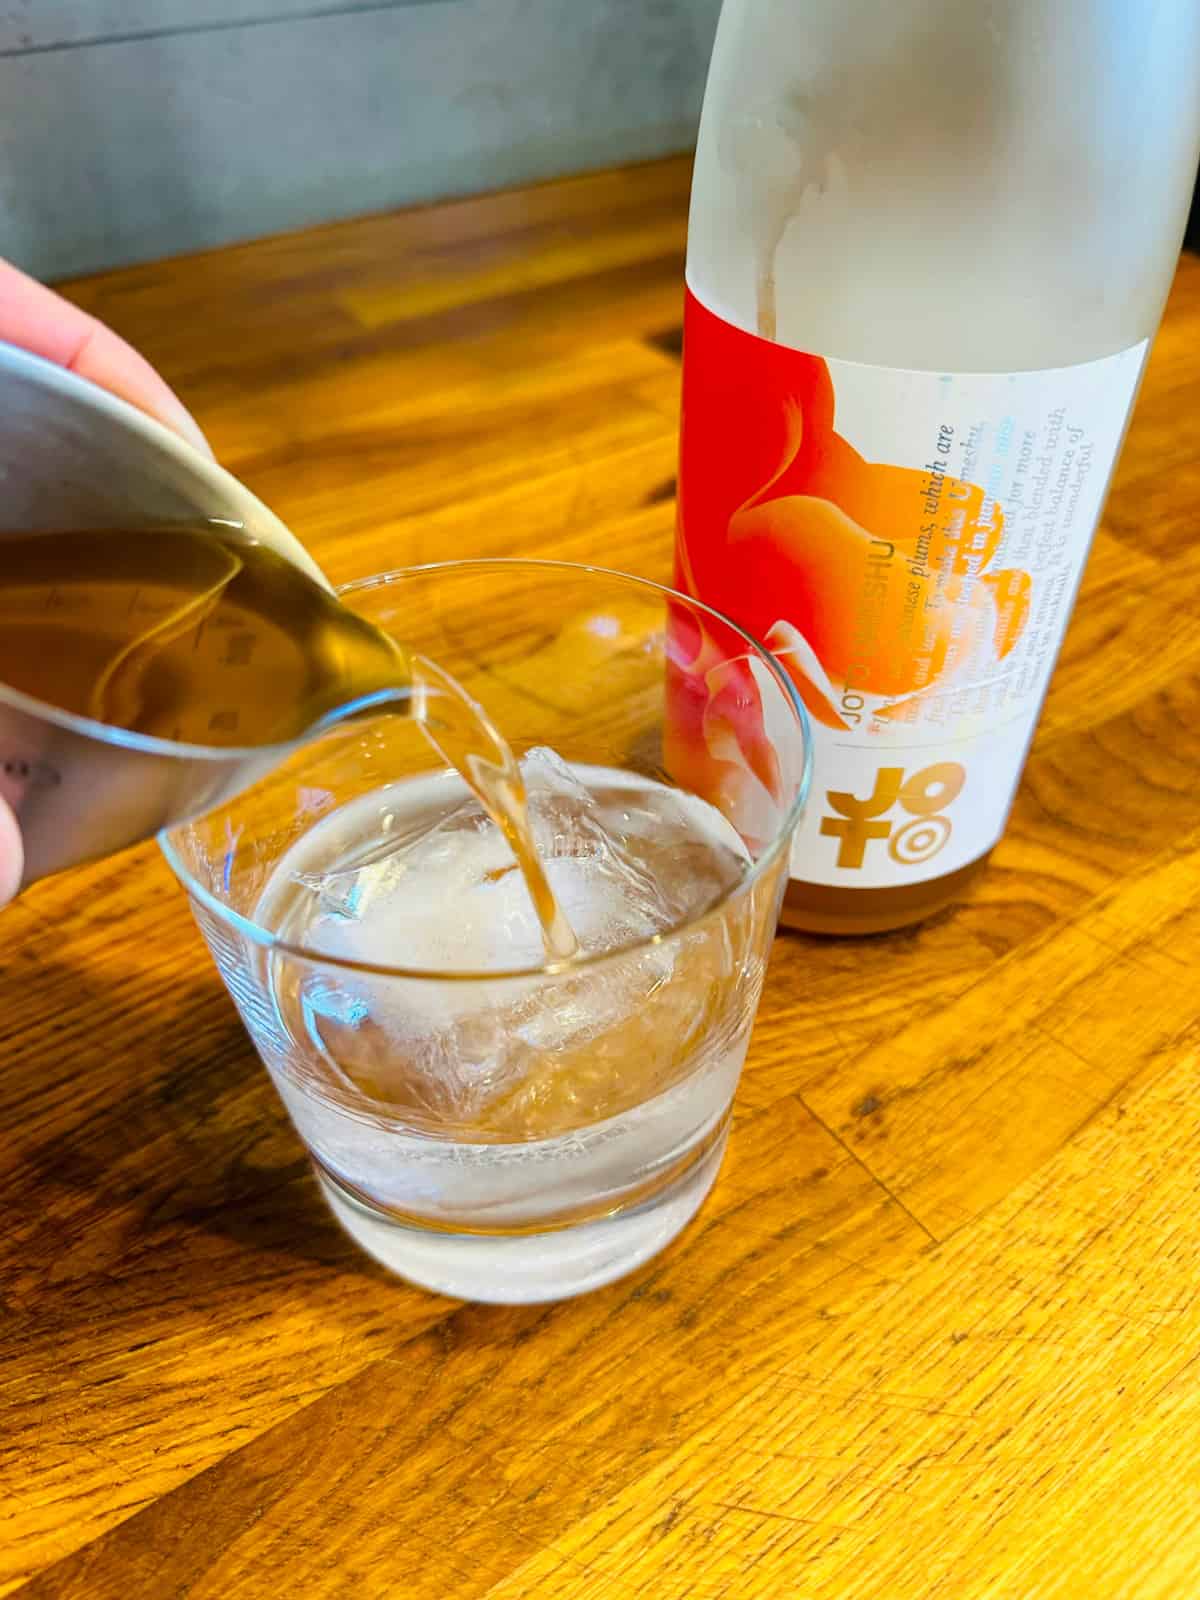 Pale peach colored liquid being poured from a steel measuring jigger into a rocks glass with a large ice cube next to a bottle of umeshu sake with a large red and orange flower on the label.